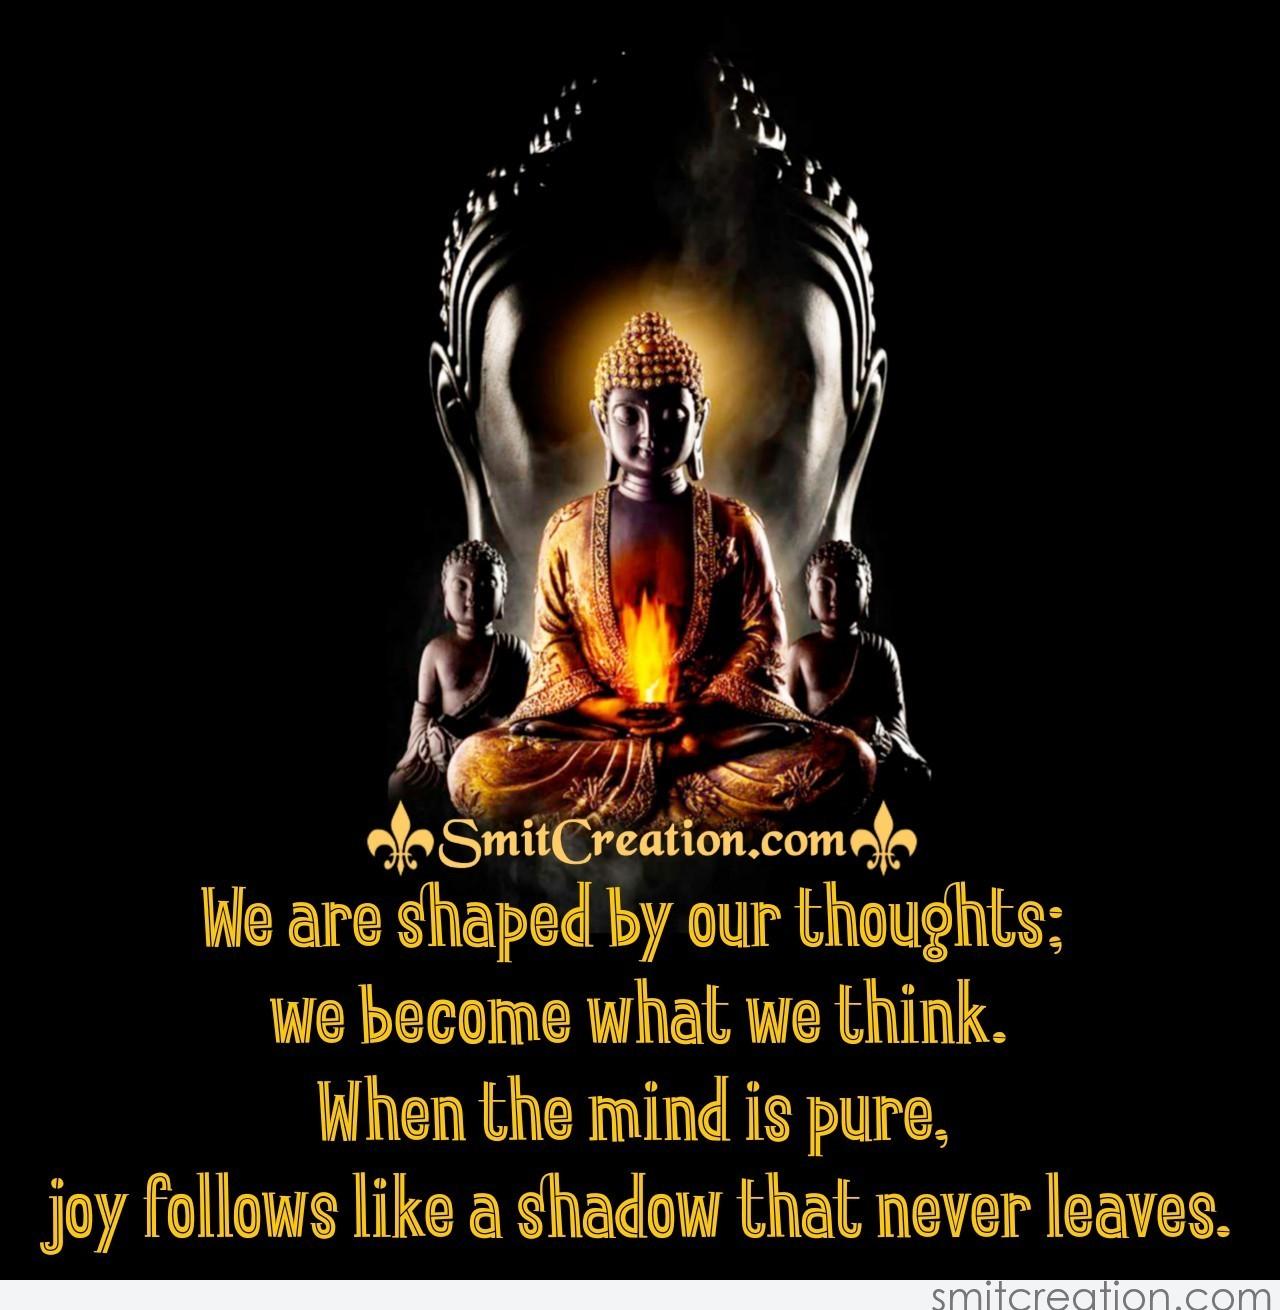 Buddha Quote On Our Thoughts - SmitCreation.com